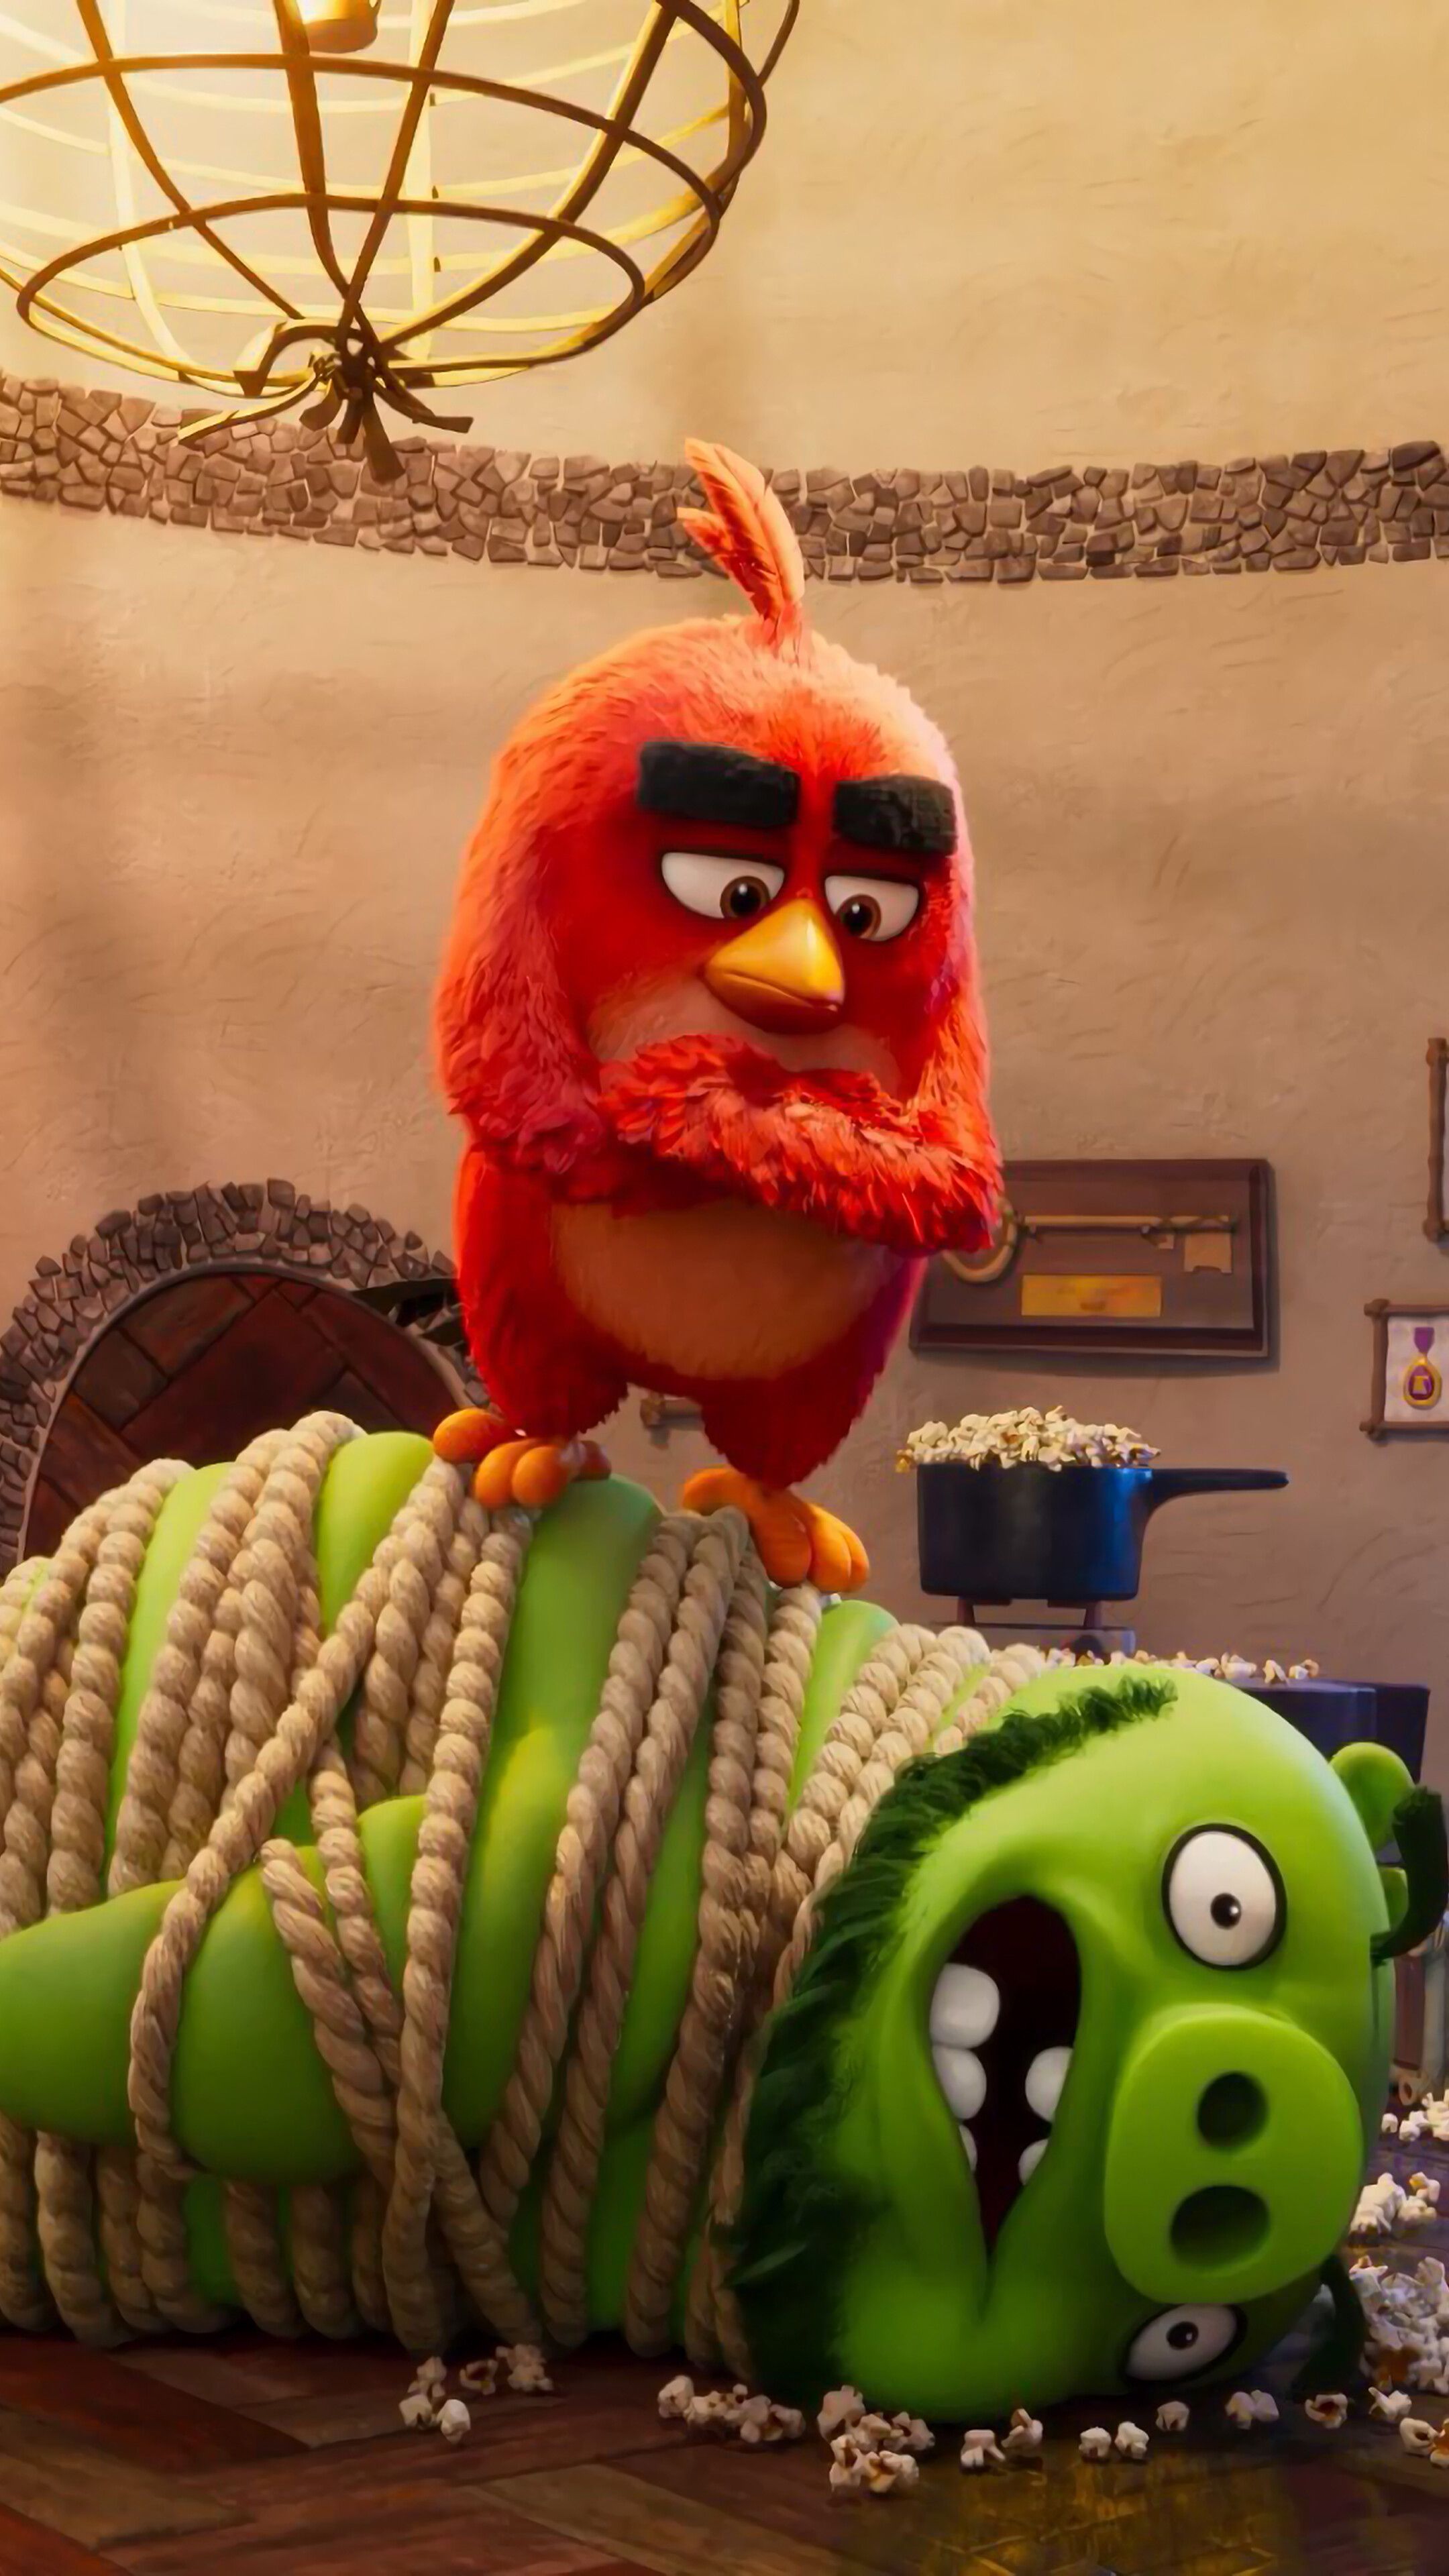 Angry Birds Movie Red, Leonard, 4K phone HD Wallpaper, Image, Background, Photo and Picture. Mocah HD Wallpaper